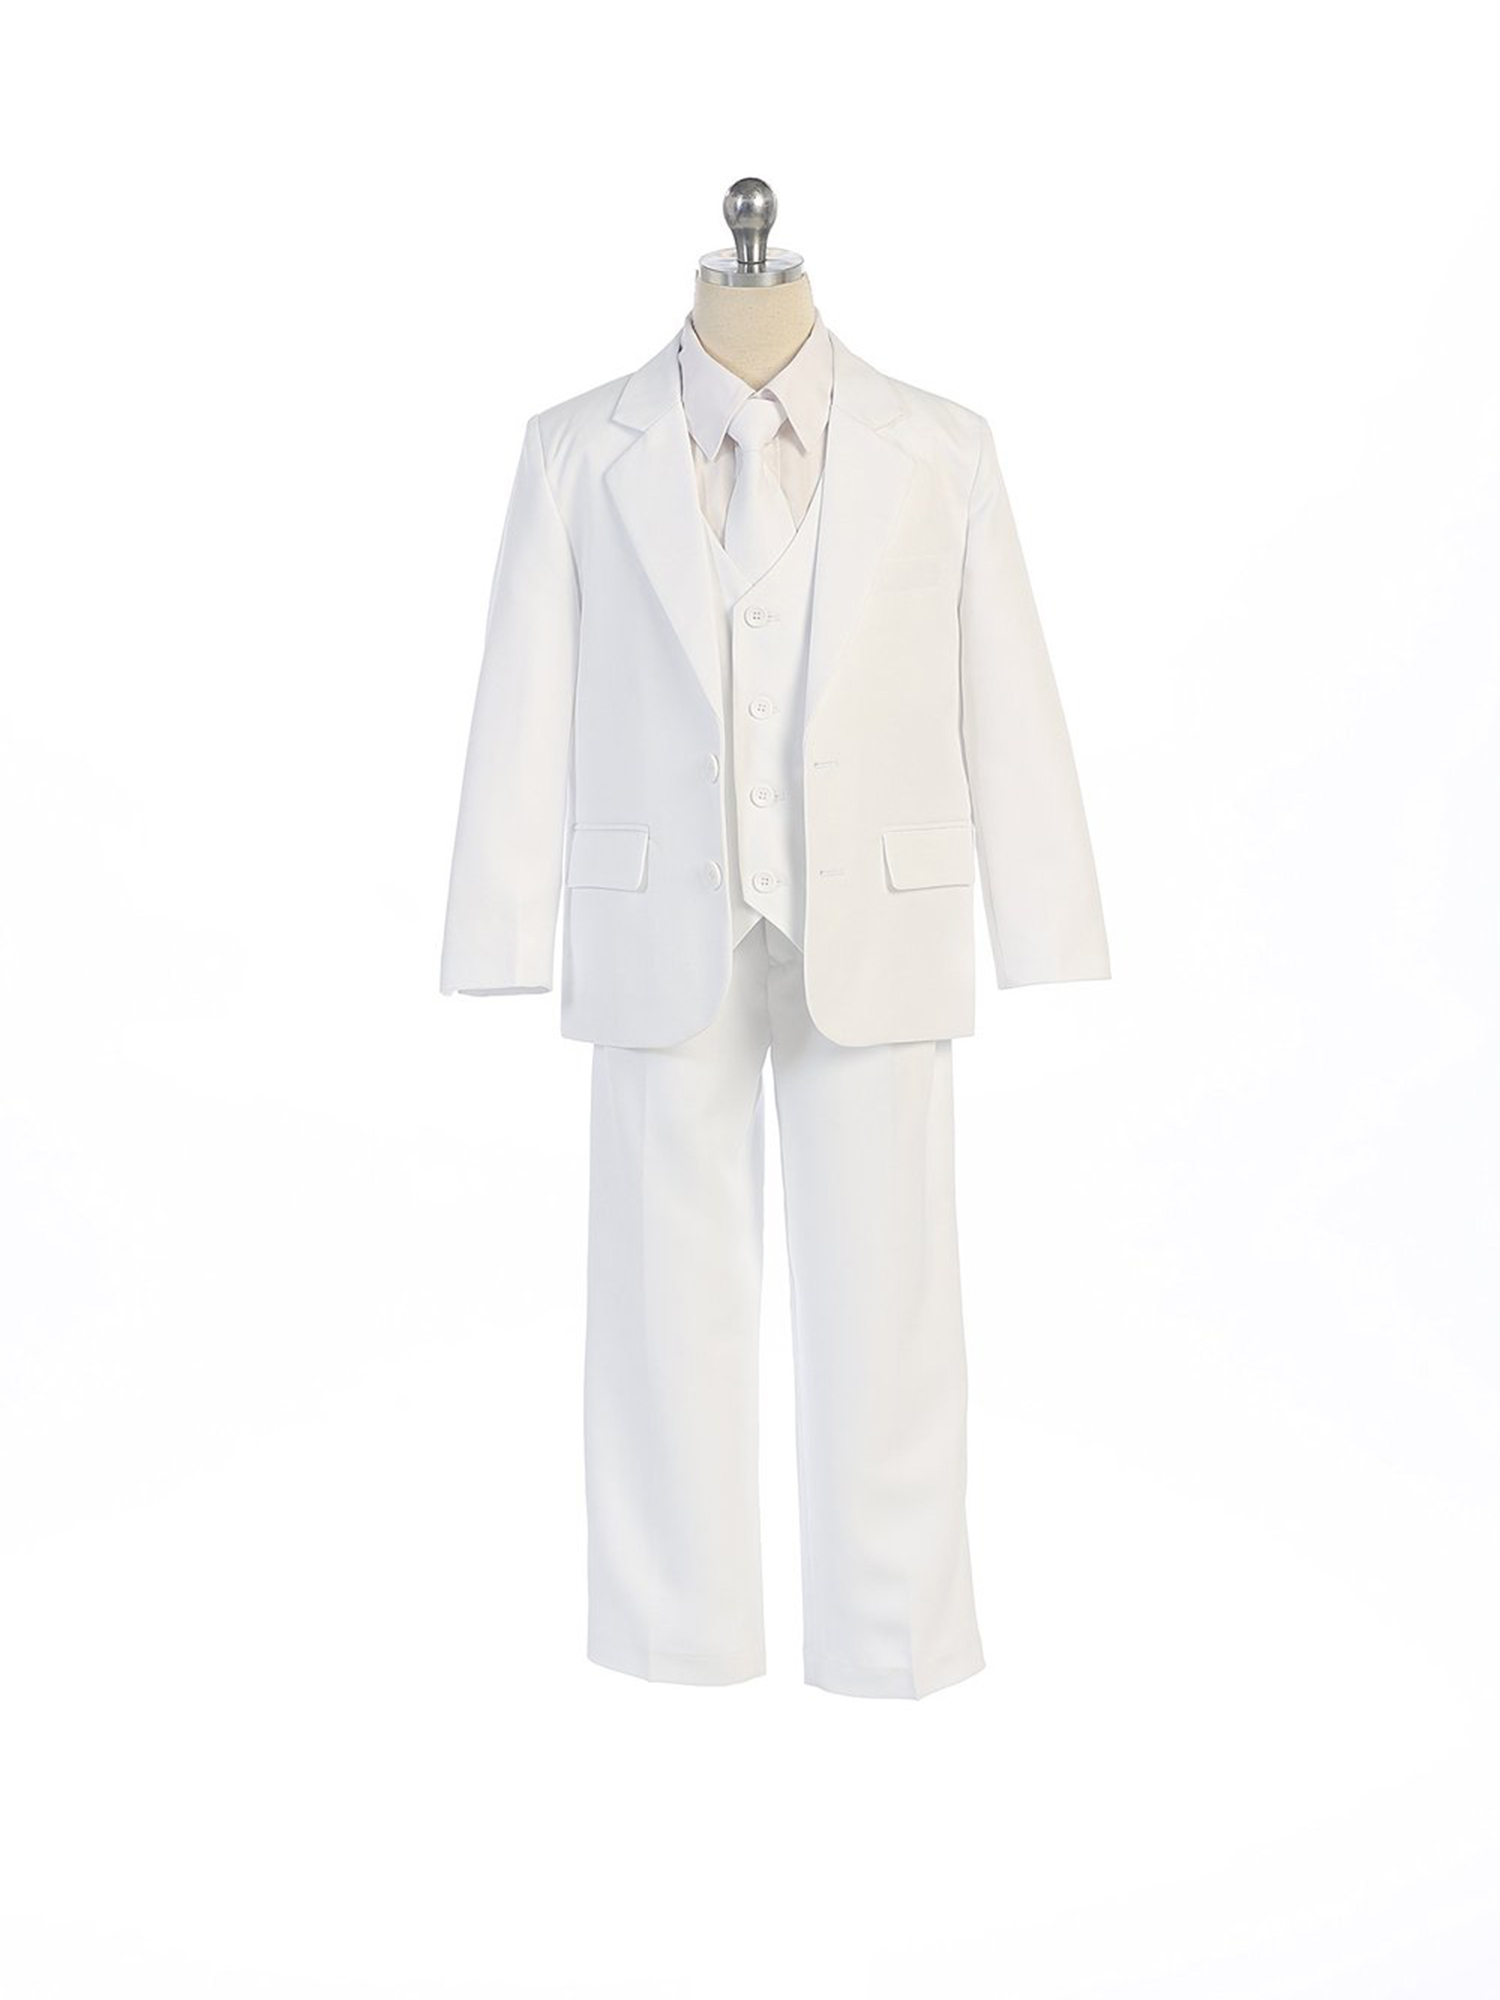 COLE Boys Suit with Shirt and Vest (5-Piece) - (14 Husky, White)